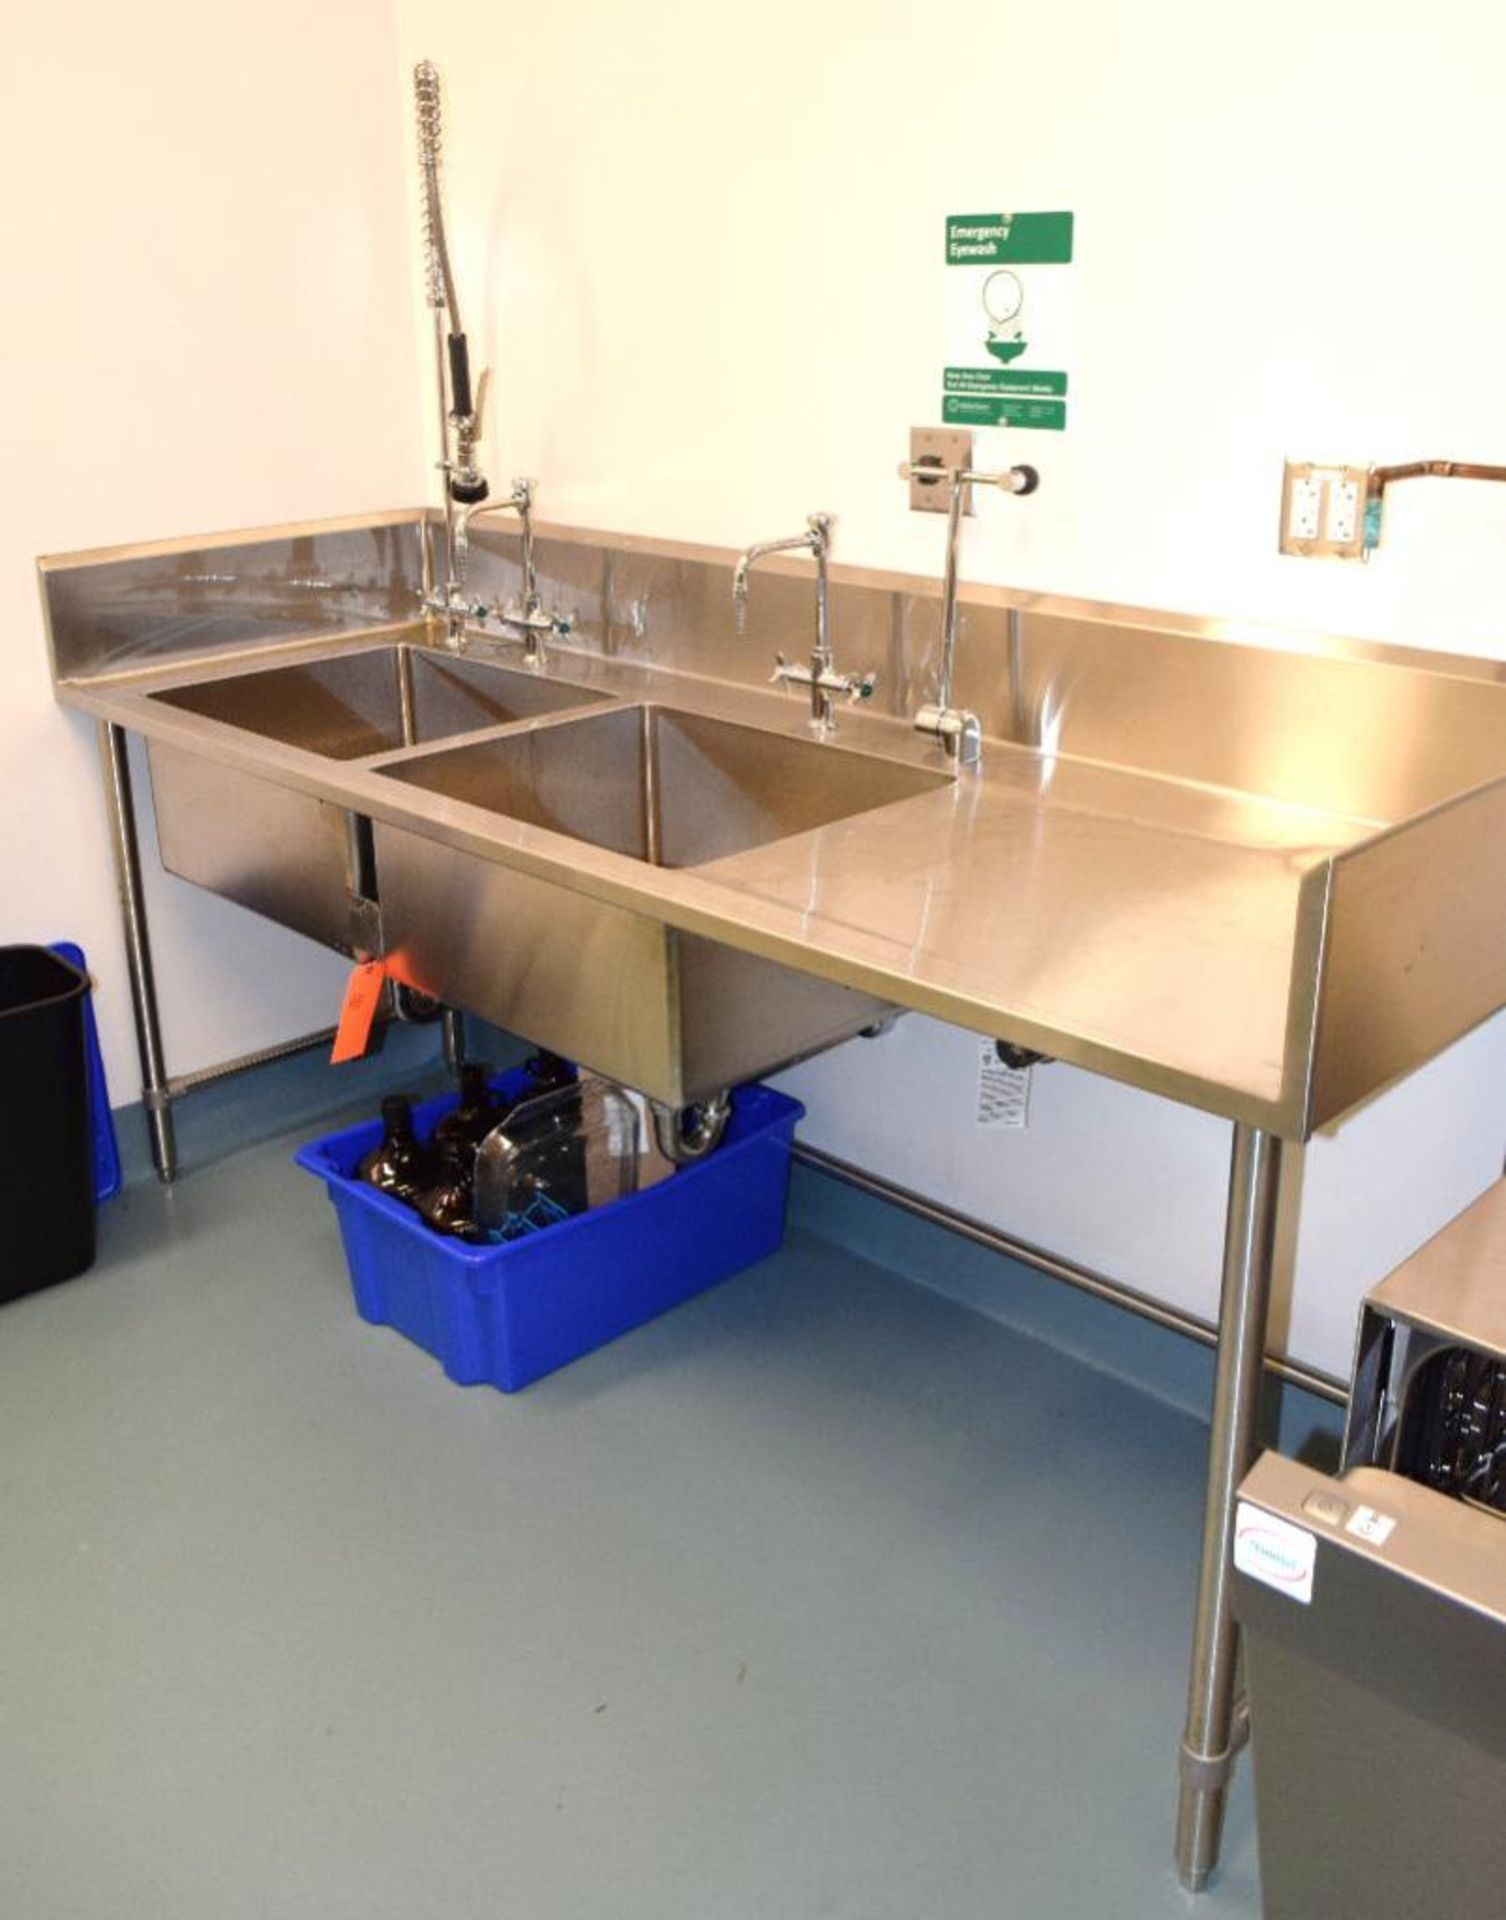 Stainless Steel Double Sink, Approximate 88" long x 30" wide.